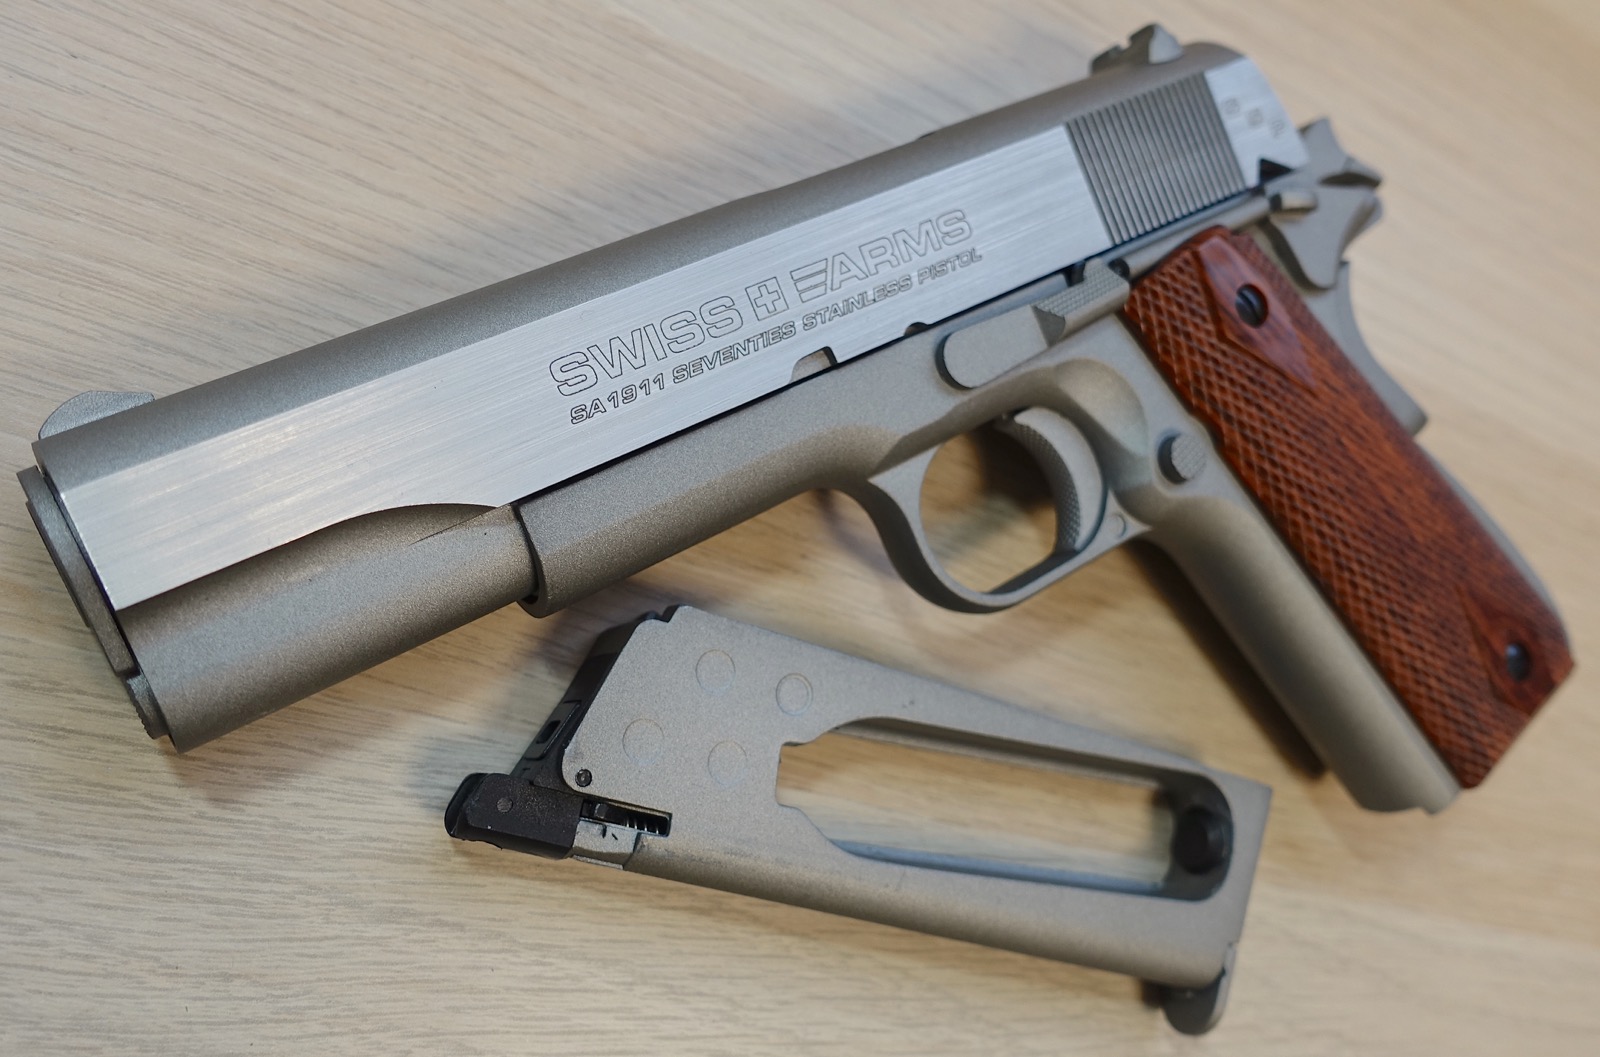 Cybergun Swiss Arms SA 1911 Silver - steel bb guns 4.5mm - Airsoft store,  replicas and military clothing with real stock and shipments in 24 working  hours.